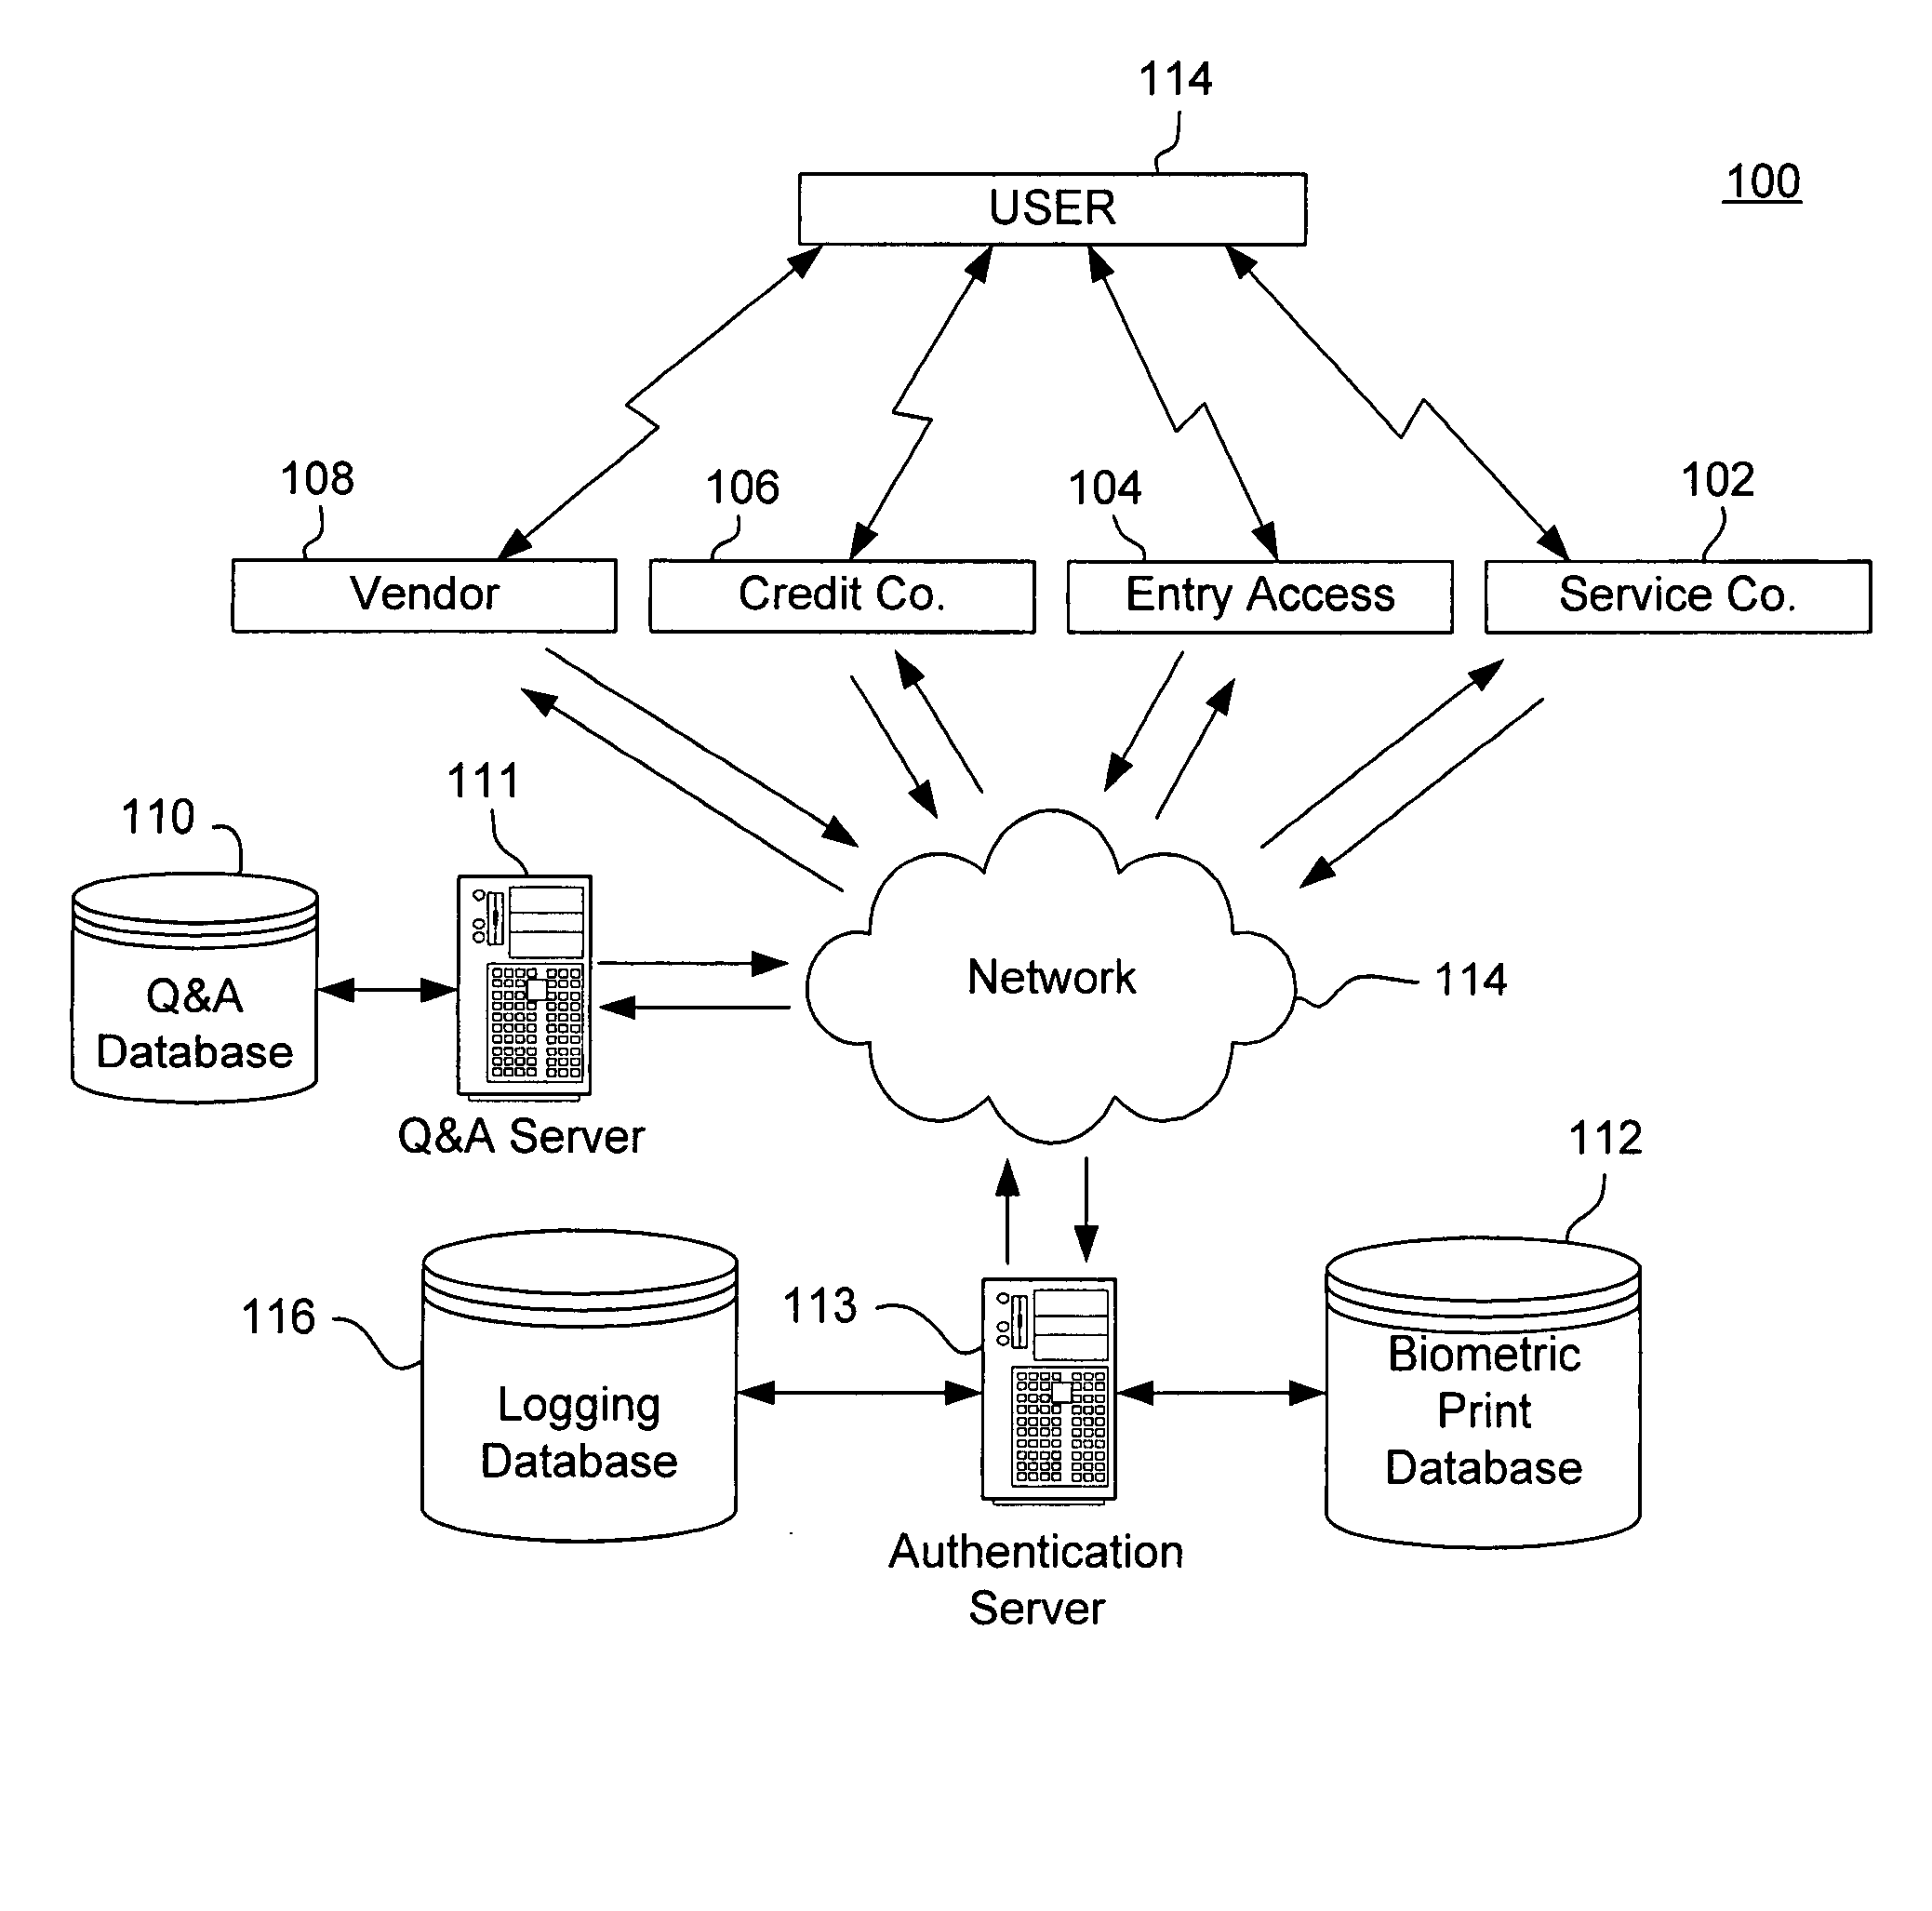 System and method for nameless biometric authentication and non-repudiation validation